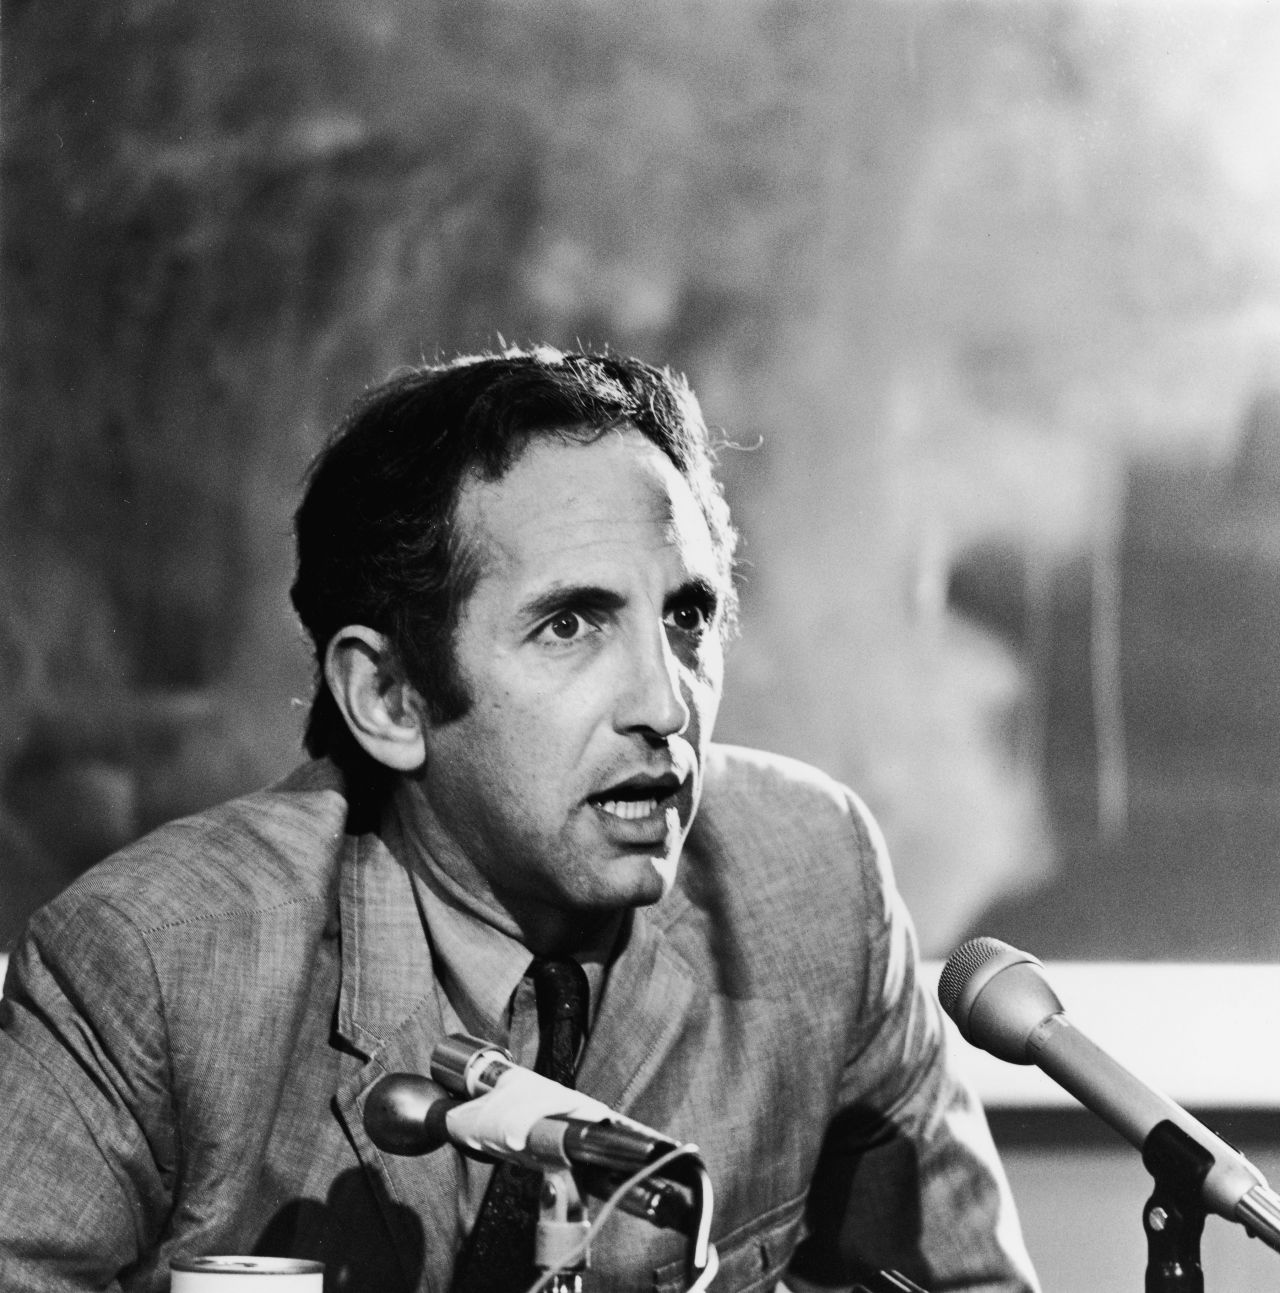 The Pentagon Papers, a top-secret document that detailed U.S. decisions leading up to the Vietnam War, were leaked to The New York Times by military analyst Daniel Ellsberg. The Nixon administration obtained an injunction to stop their publication.